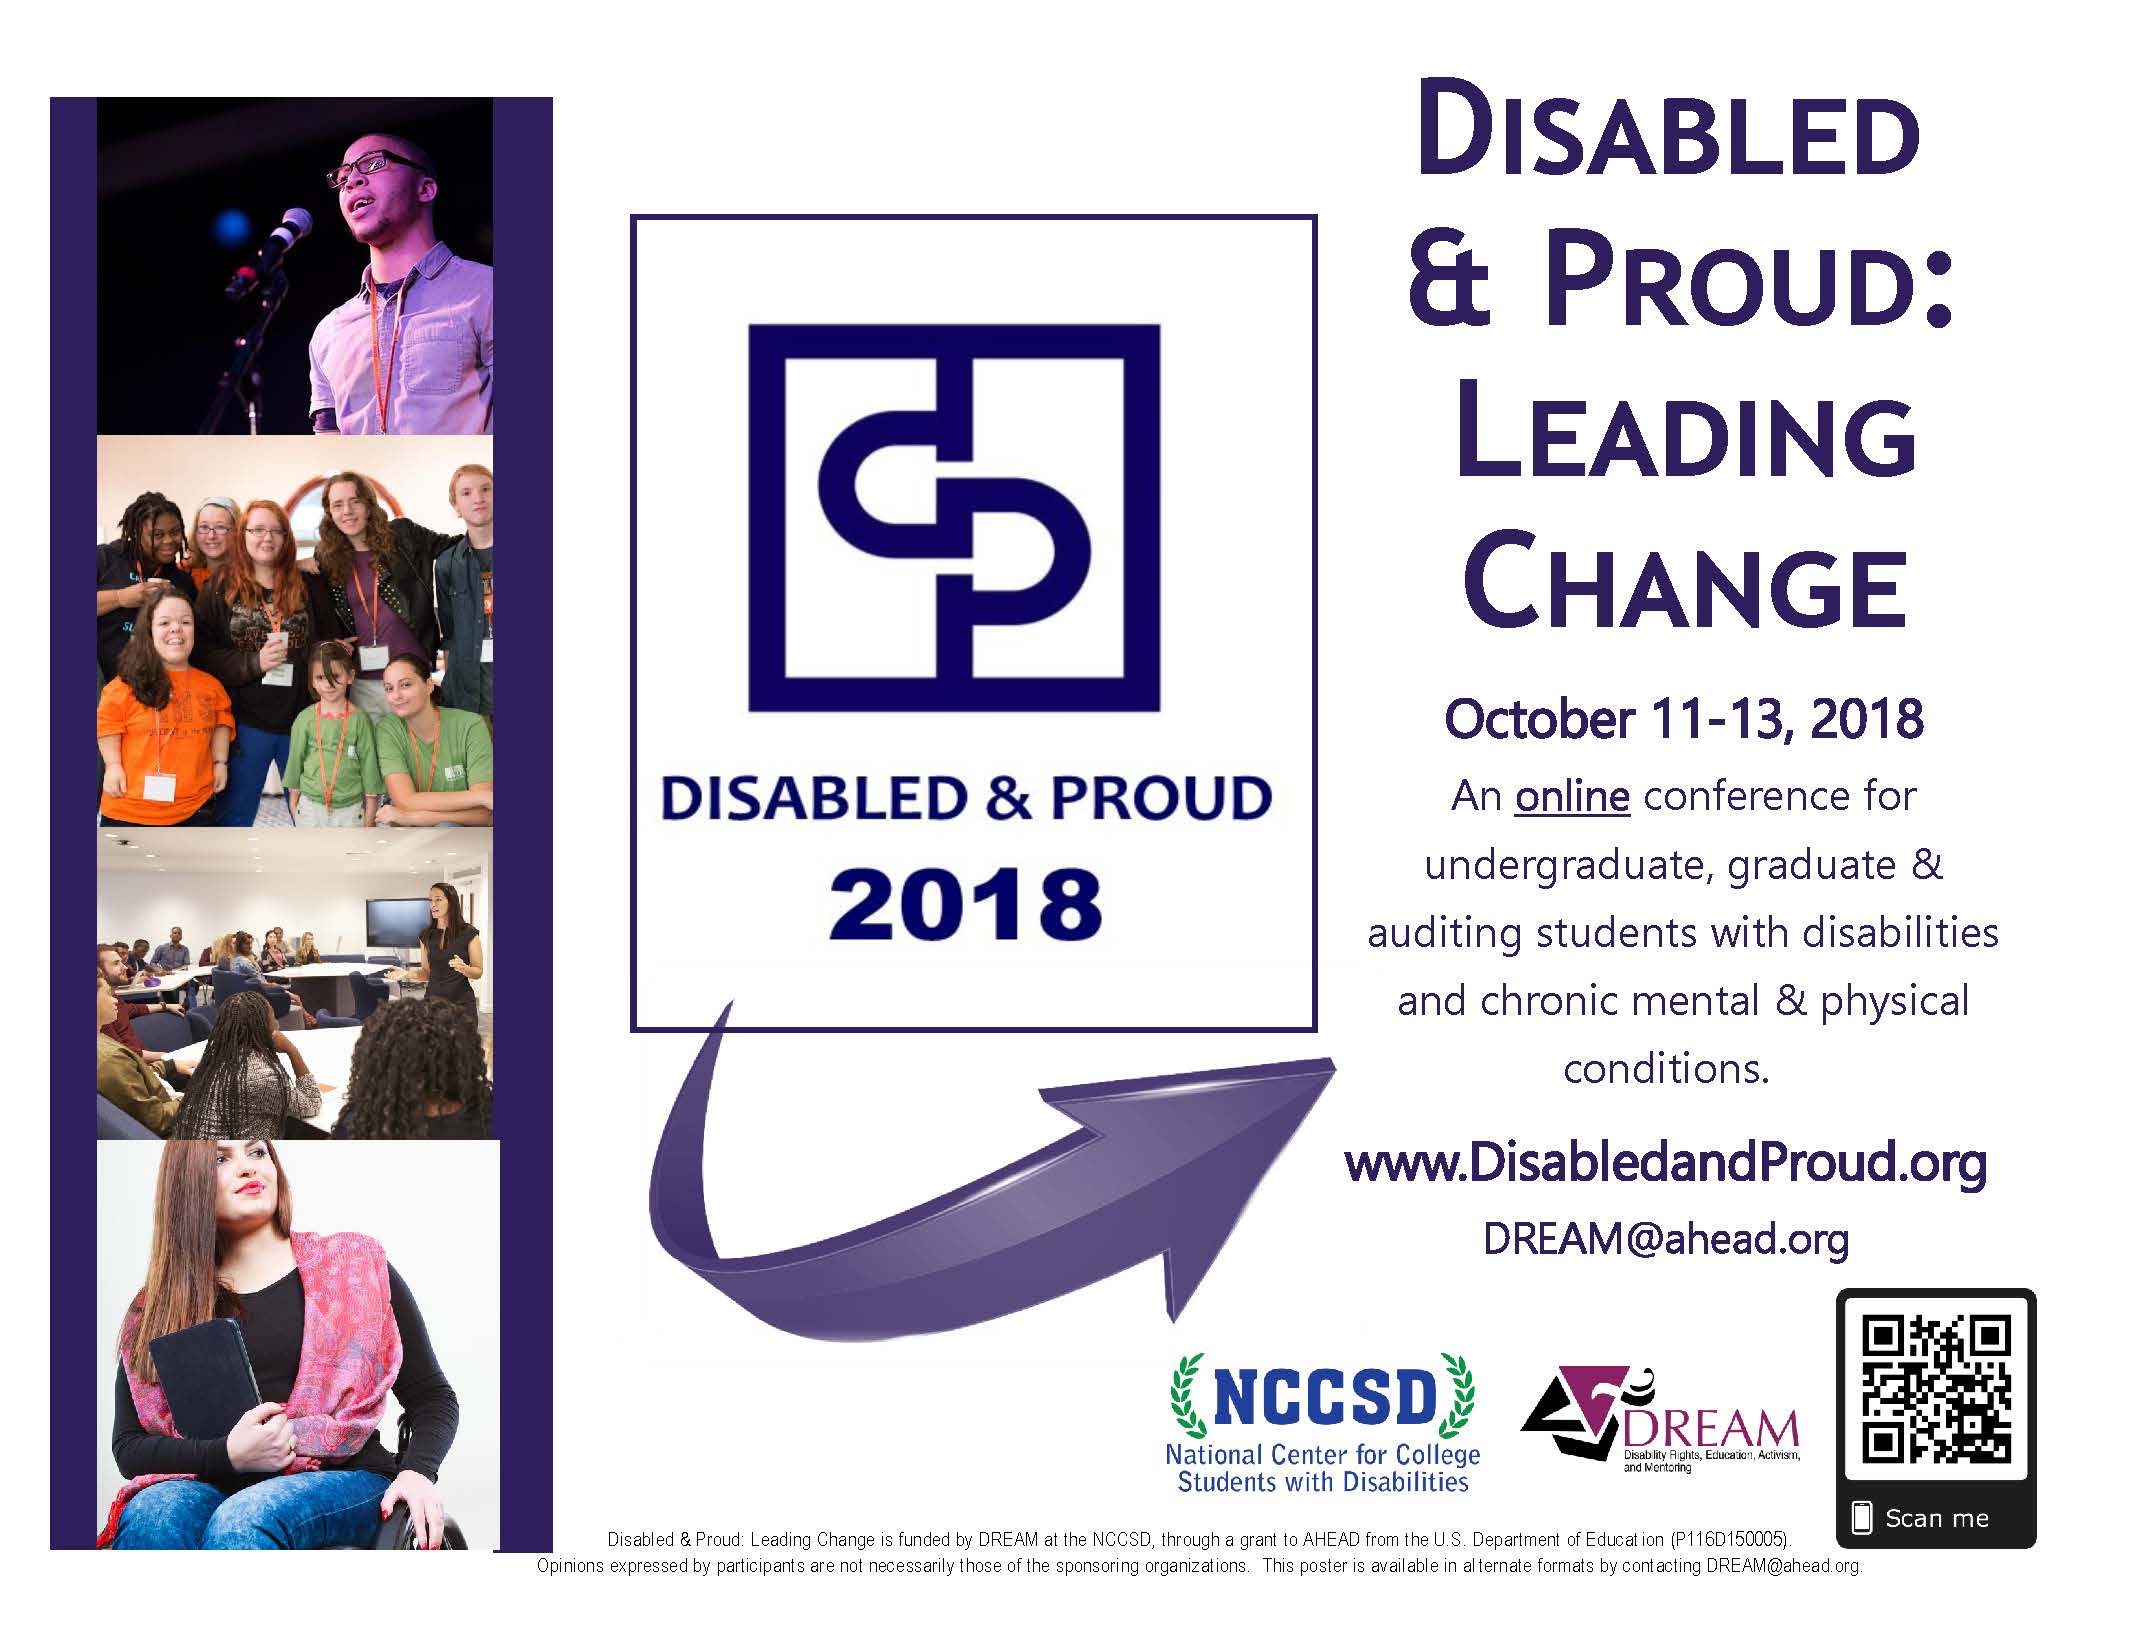 Disabled & Proud: Leading Change